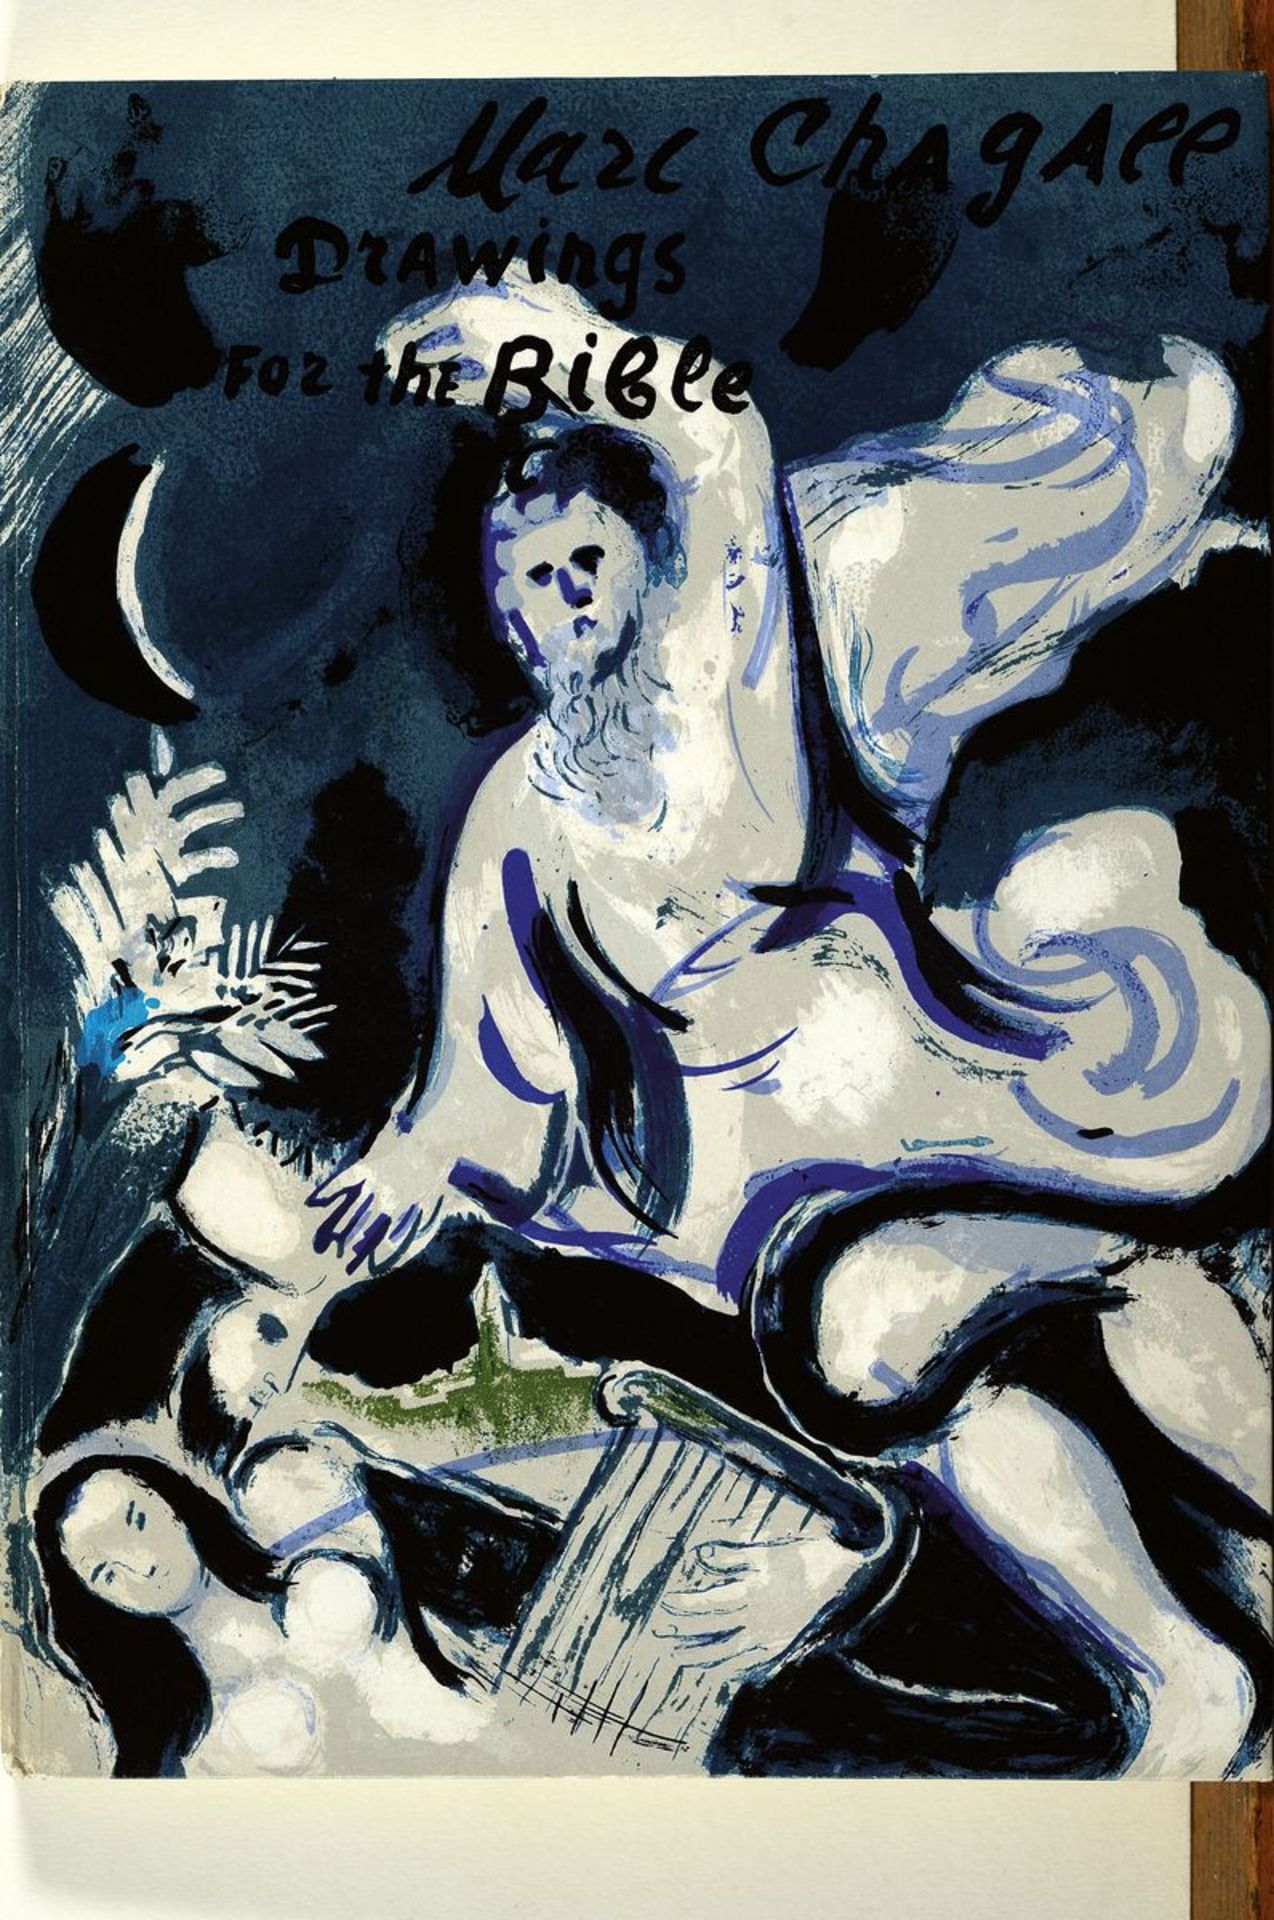 Marc Chagall, 1887 - 1985, Titel: Drawings for the Bible,